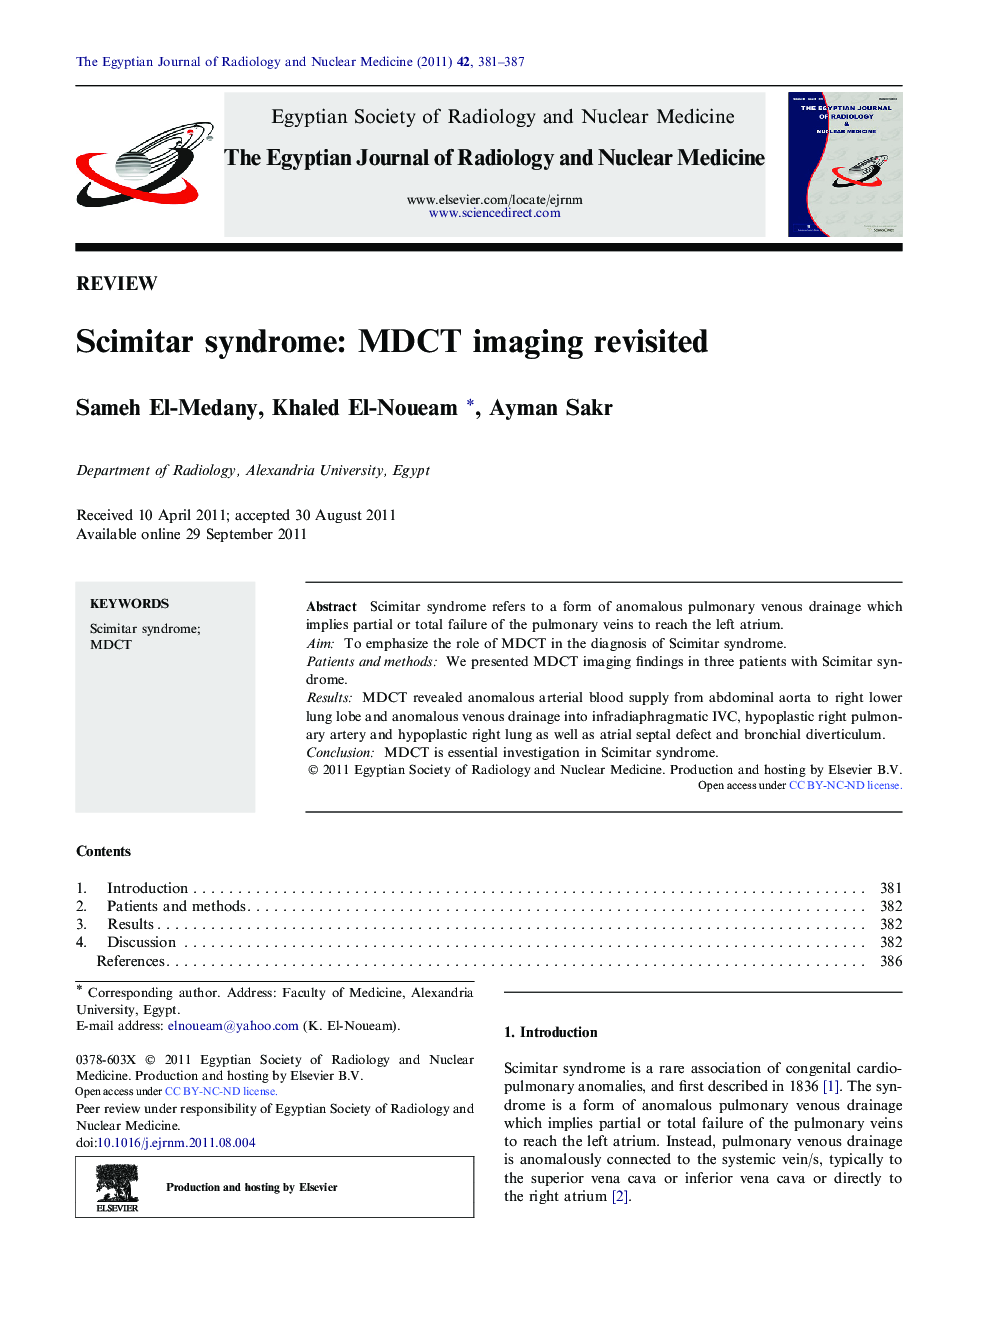 Scimitar syndrome: MDCT imaging revisited 